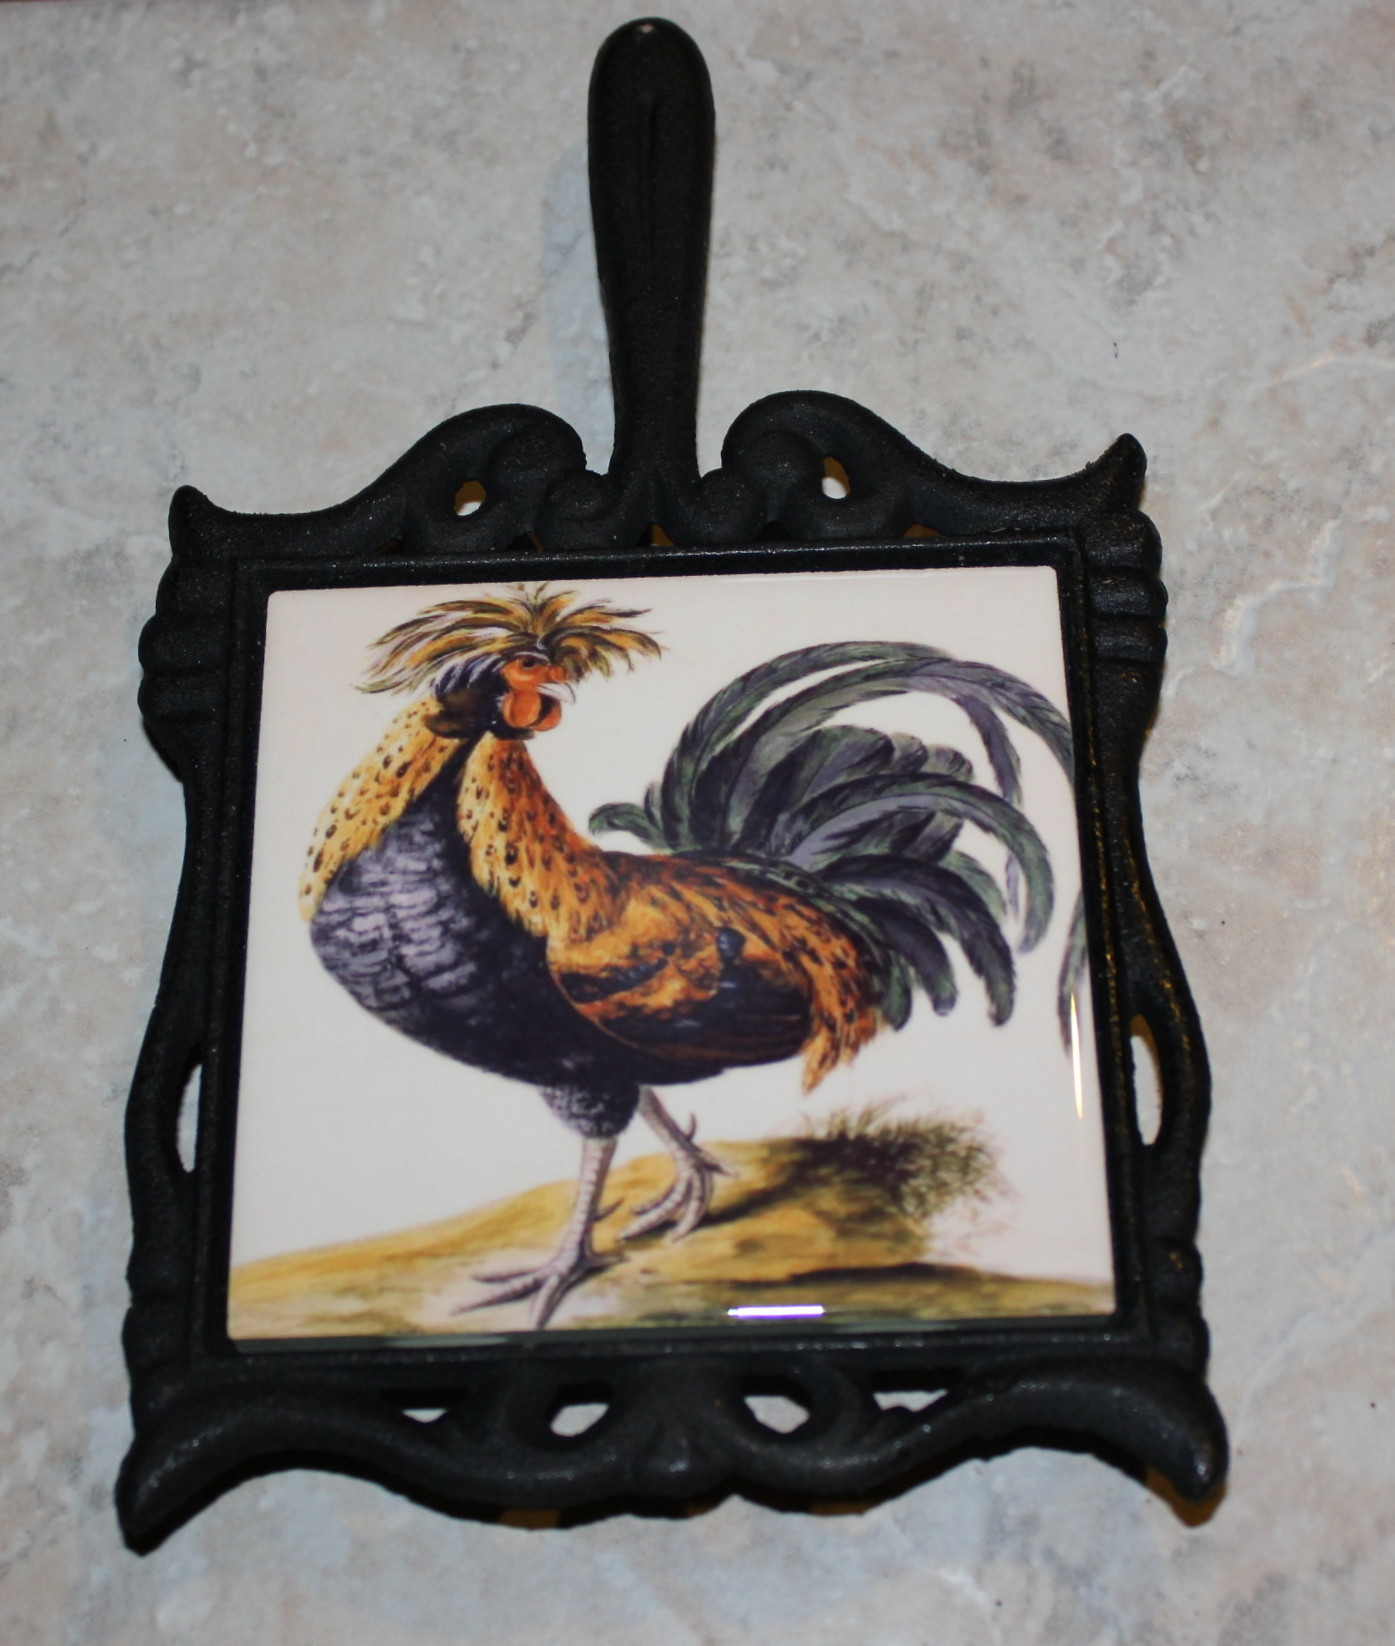 rooster trivets made with sublimation printing